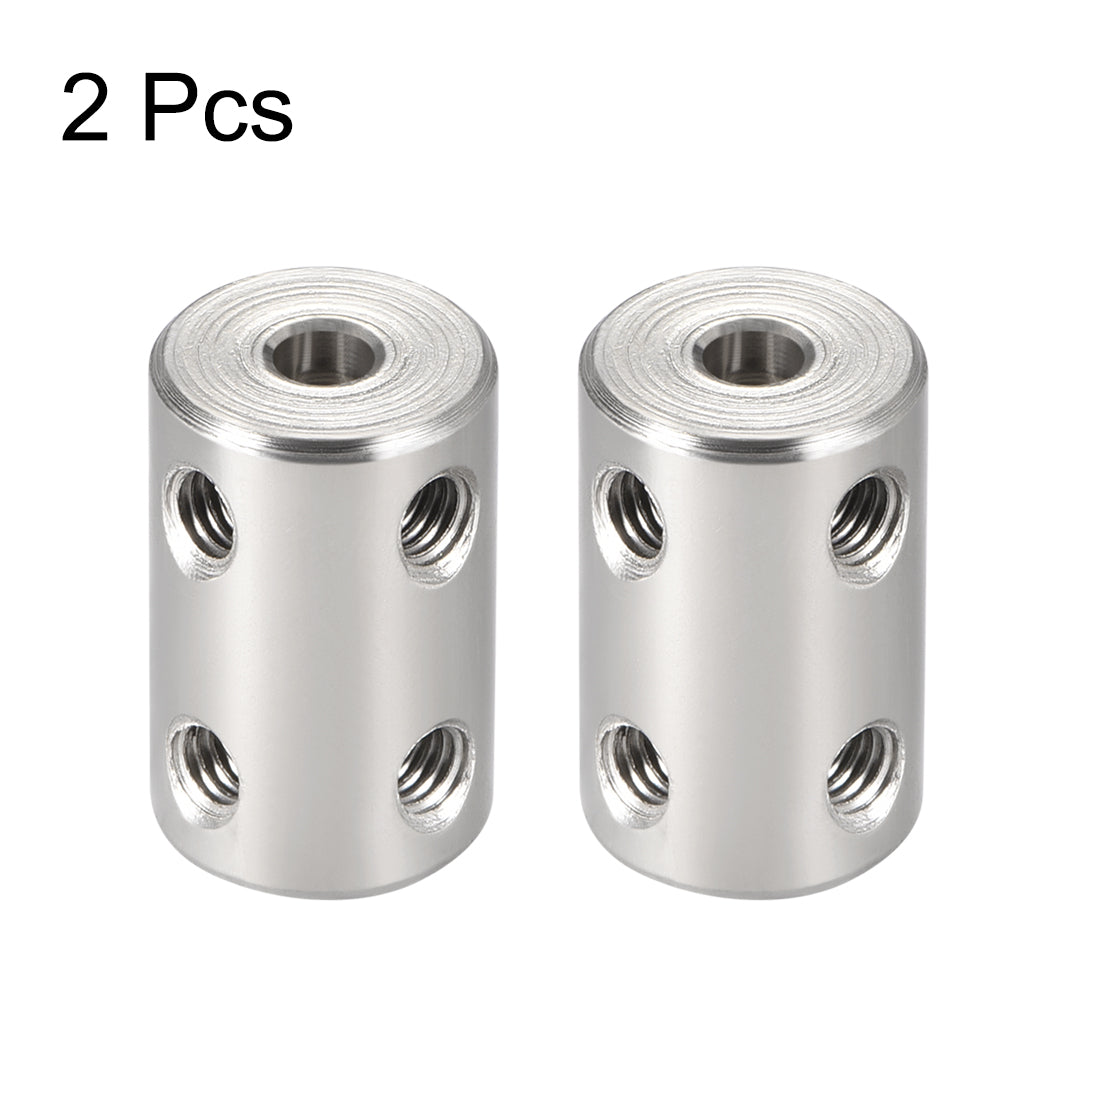 uxcell Uxcell Shaft Coupling 4mm to 4mm Bore L22xD14 Robot Motor Wheel Rigid Coupler Connector Silver Tone 2 Pcs